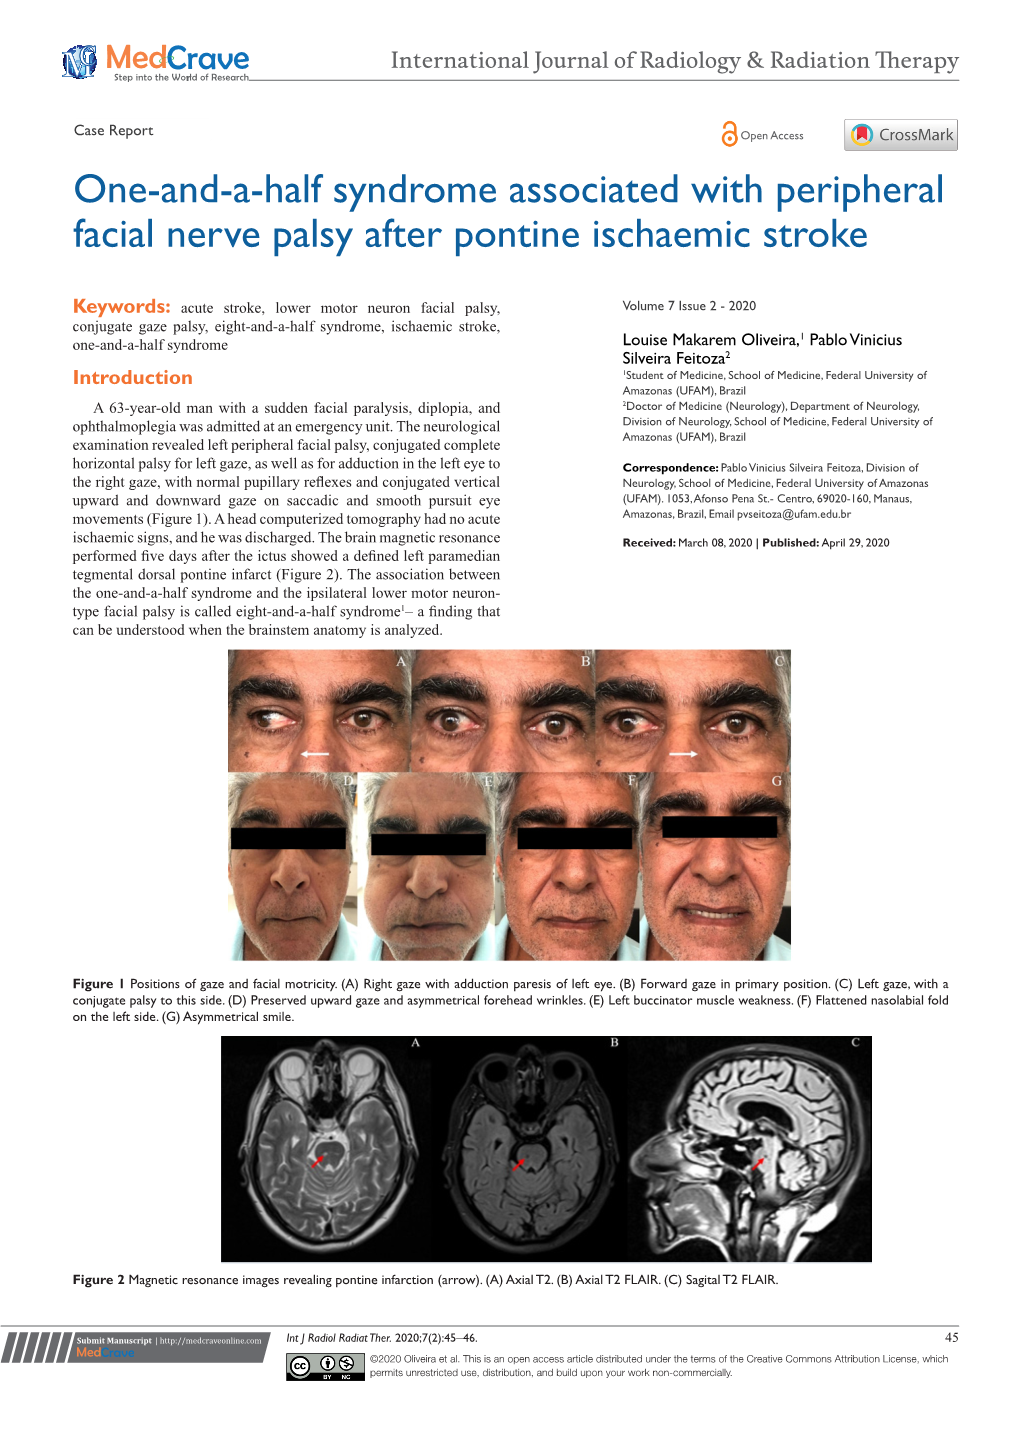 One-And-A-Half Syndrome Associated with Peripheral Facial Nerve Palsy After Pontine Ischaemic Stroke